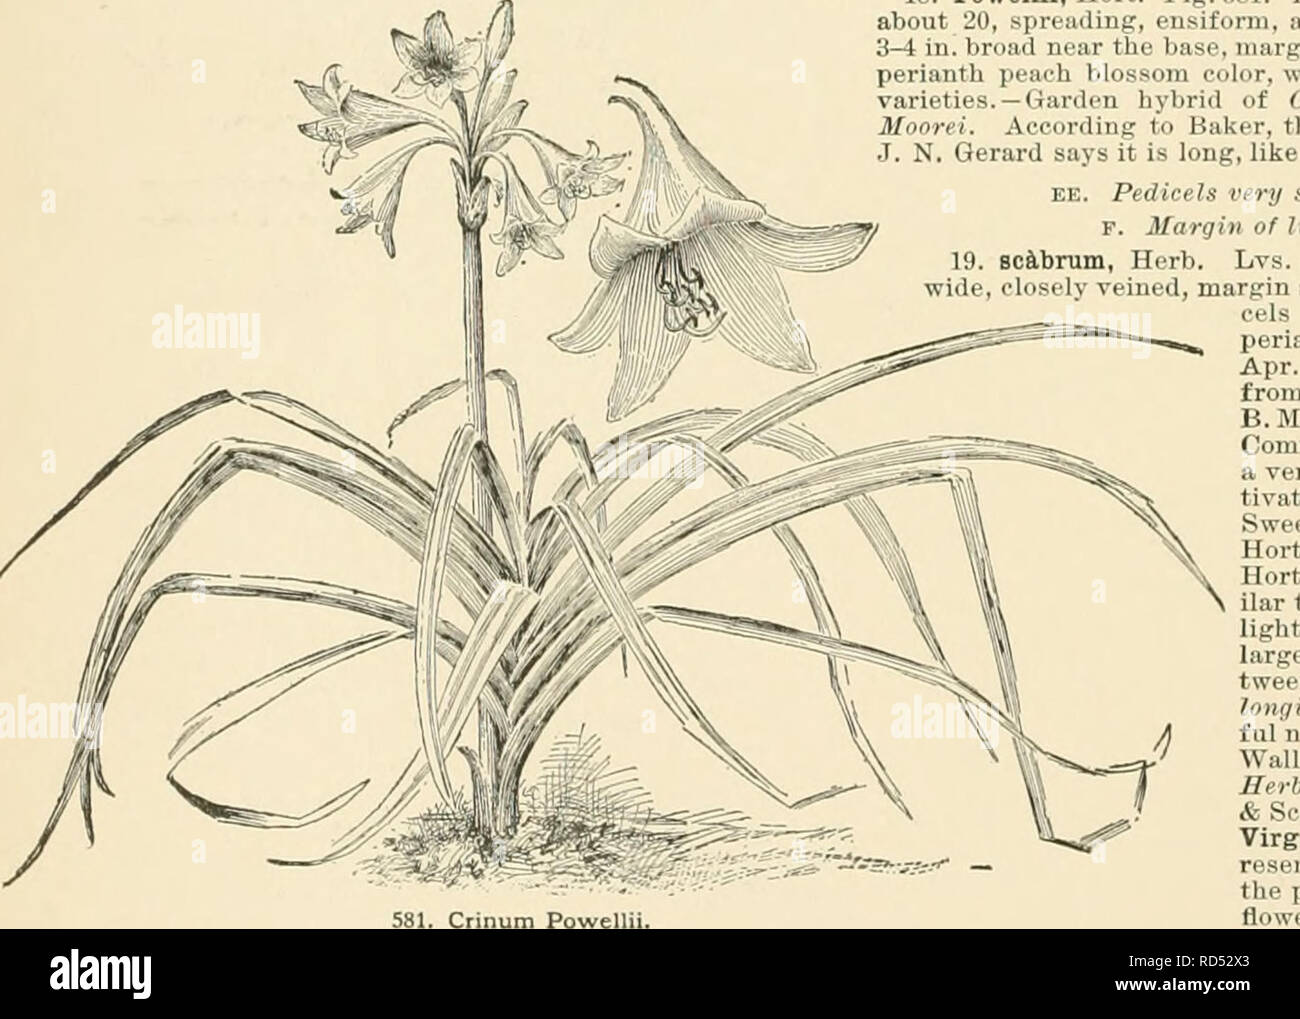 . Cyclopedia of American horticulture, comprising suggestions for cultivation of horticultural plants, descriptions of the species of fruits, vegetables, flowers, and ornamental plants sold in the United States and Canada, together with geographical and biographical sketches. Gardening. CRINUM species from Zanzibar, probably not known outside of one or two botanical gardens. 13. variibile, Herb. (C. crasstVdiium, Herb.). Bulb ovoid, 3-4 in. thick : Ivs. lK-2 ft. long, 2 in. wide, weak: fls. 10-12 ; perianth flushed red outside : fllaments red. Cape Colony.âA rare species. .CO. Fls. fewer, usua Stock Photo